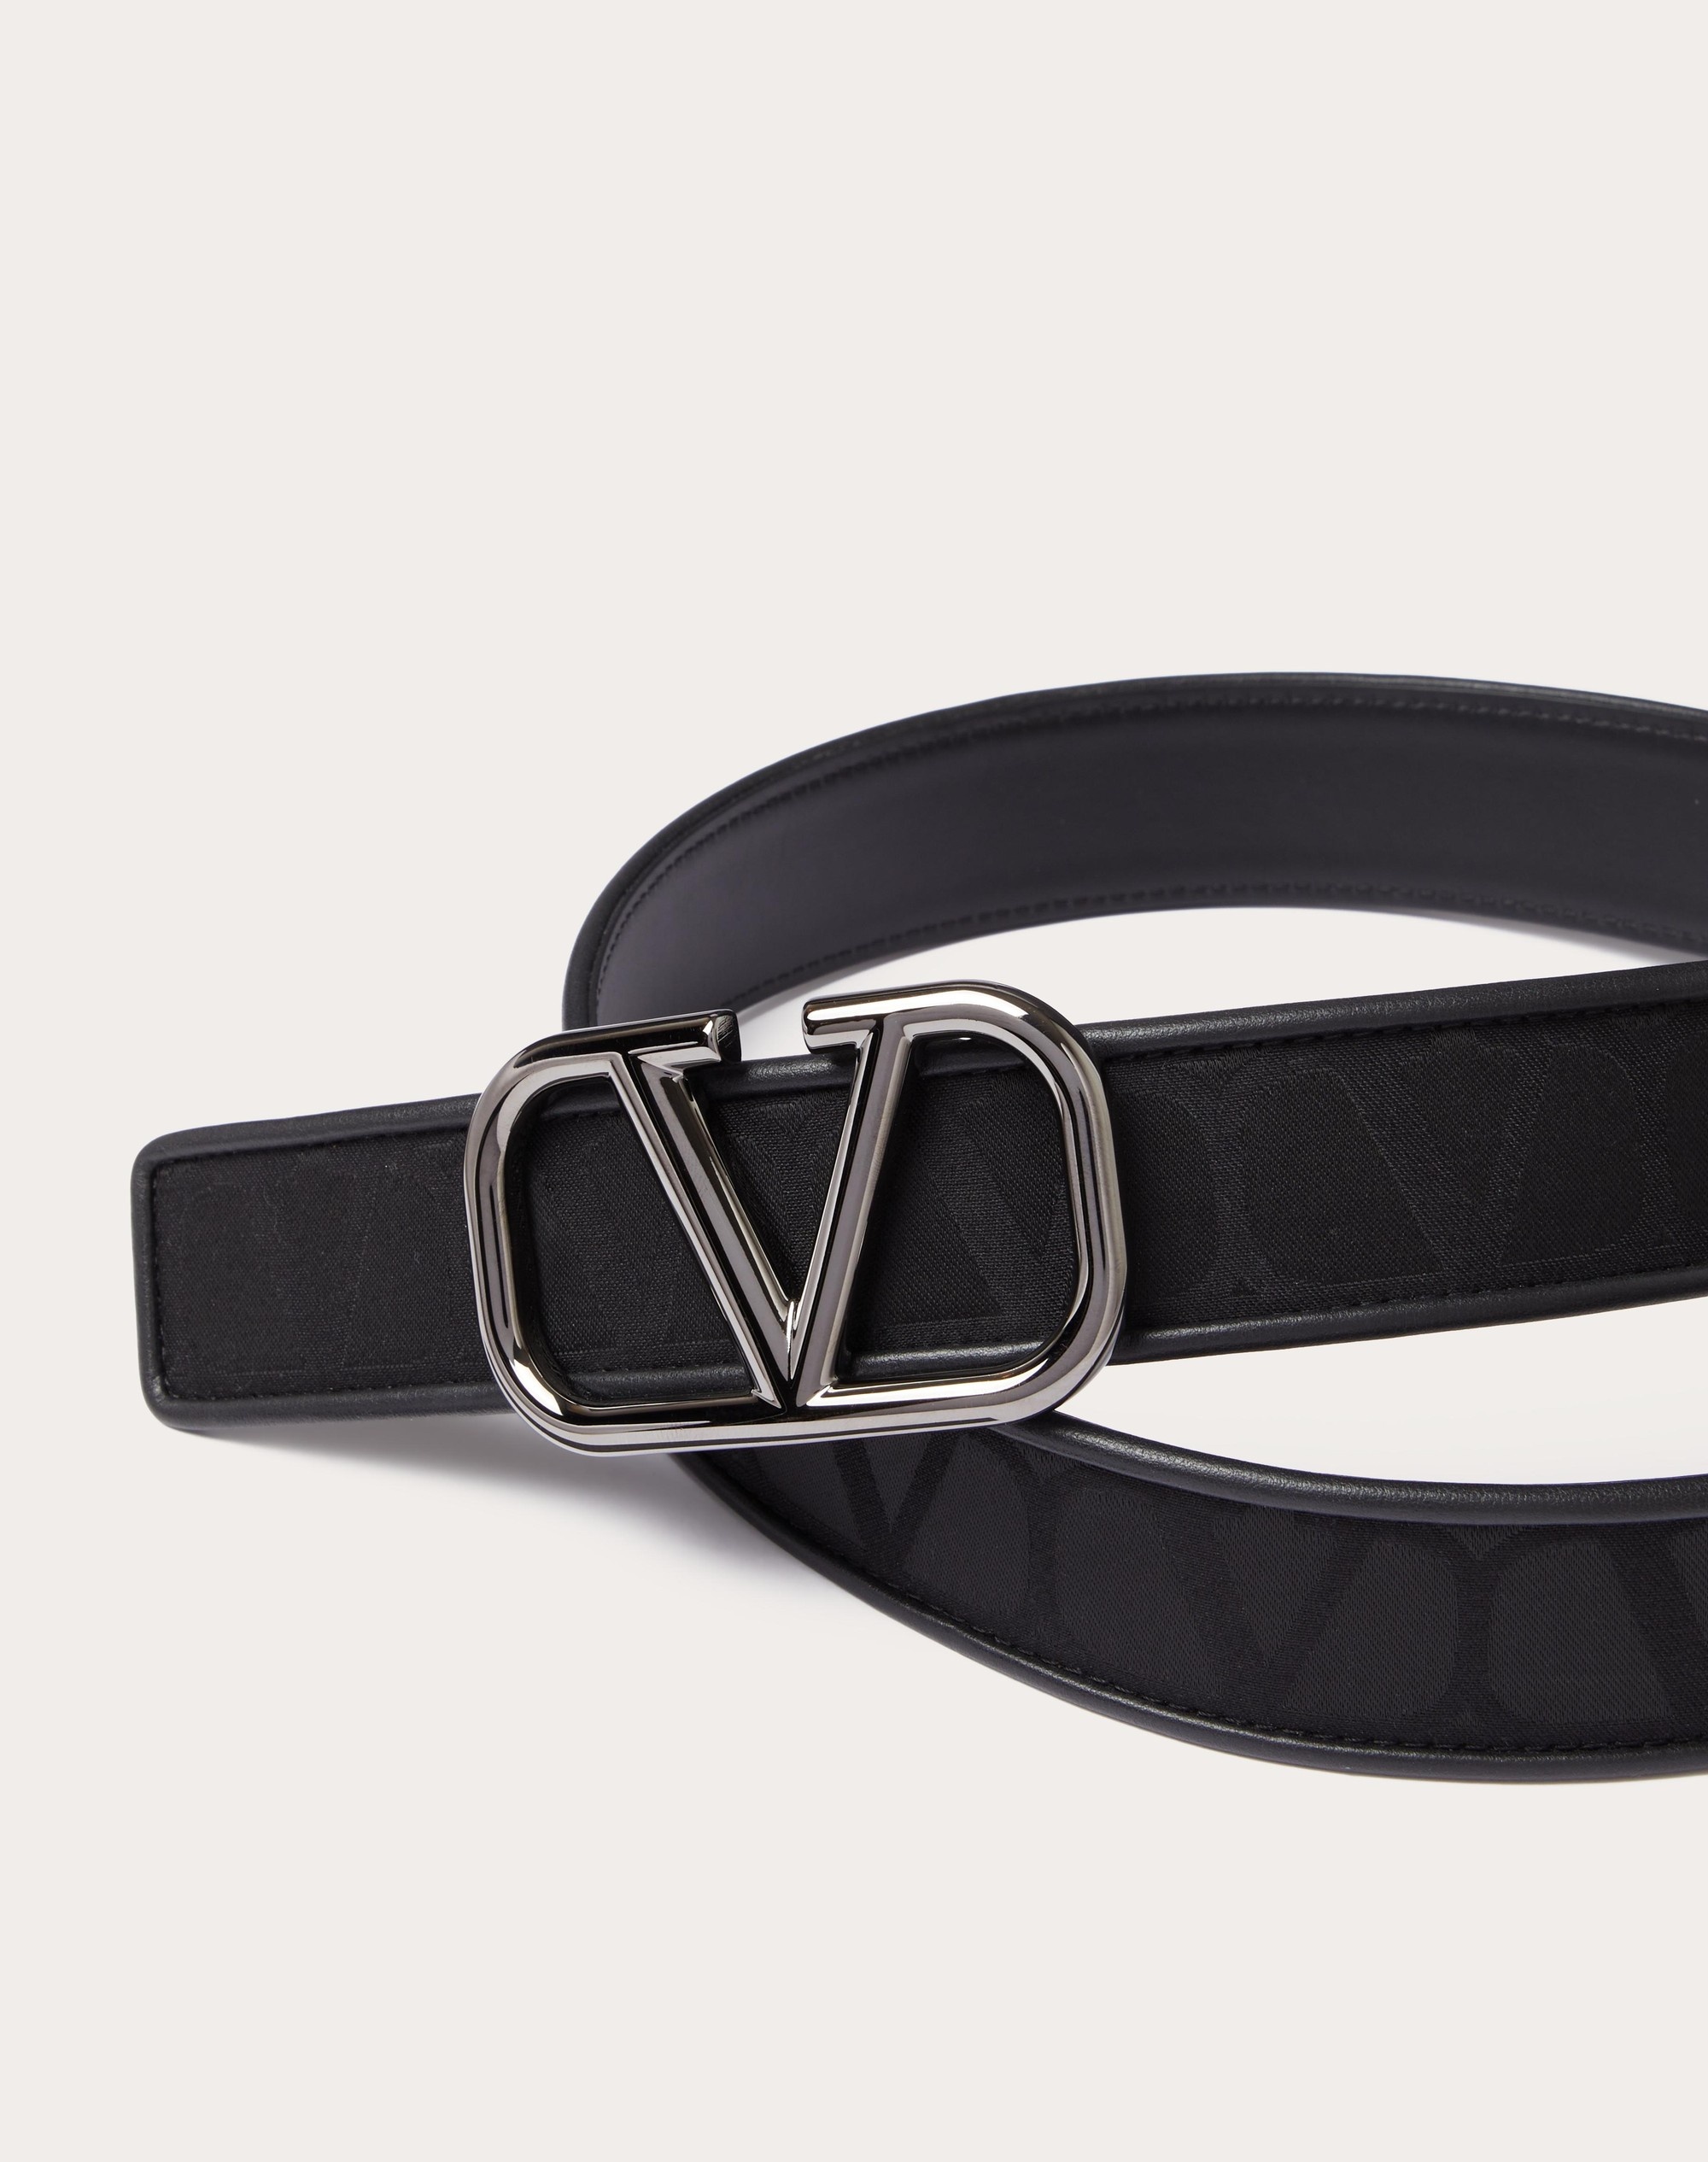 TOILE ICONOGRAPHE BELT IN TECHNICAL FABRIC WITH LEATHER DETAILS - 2